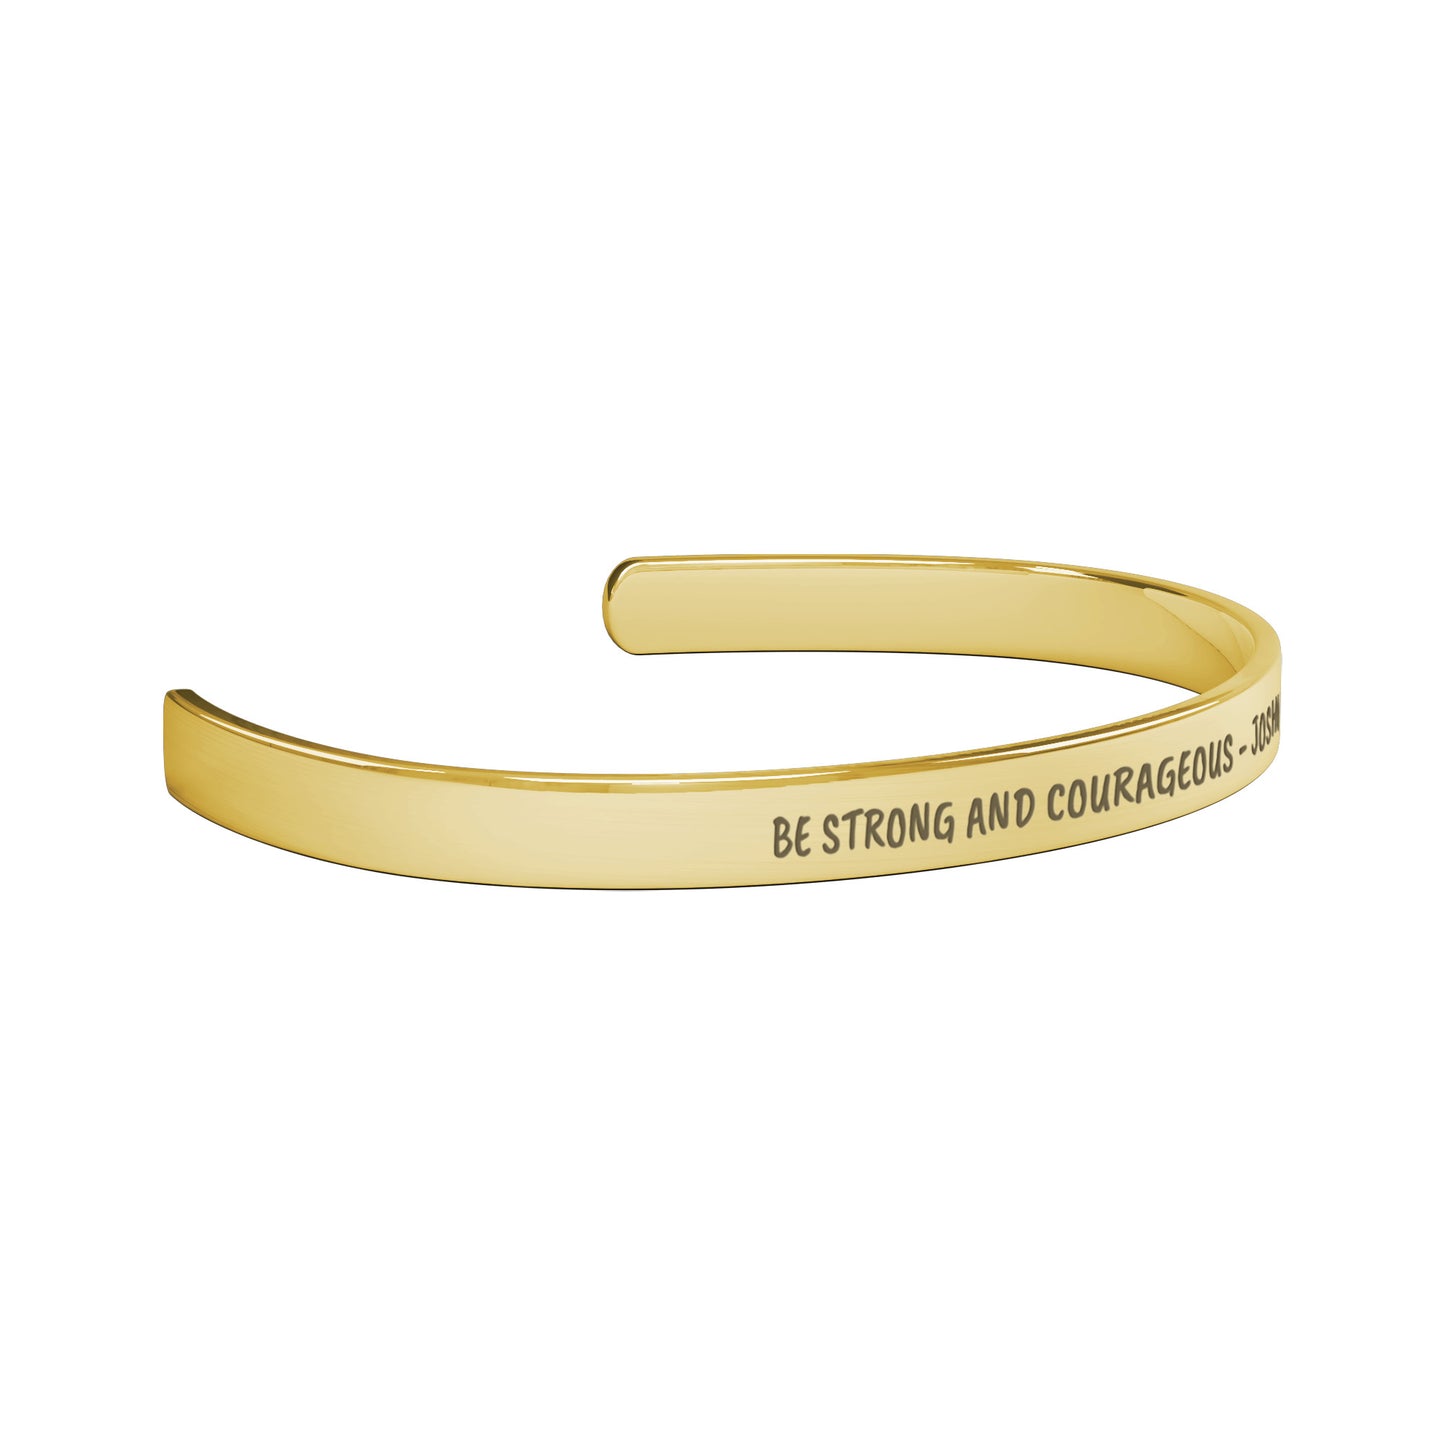 Be Strong And Courageous - Joshua 1:9 Cuff Bracelet